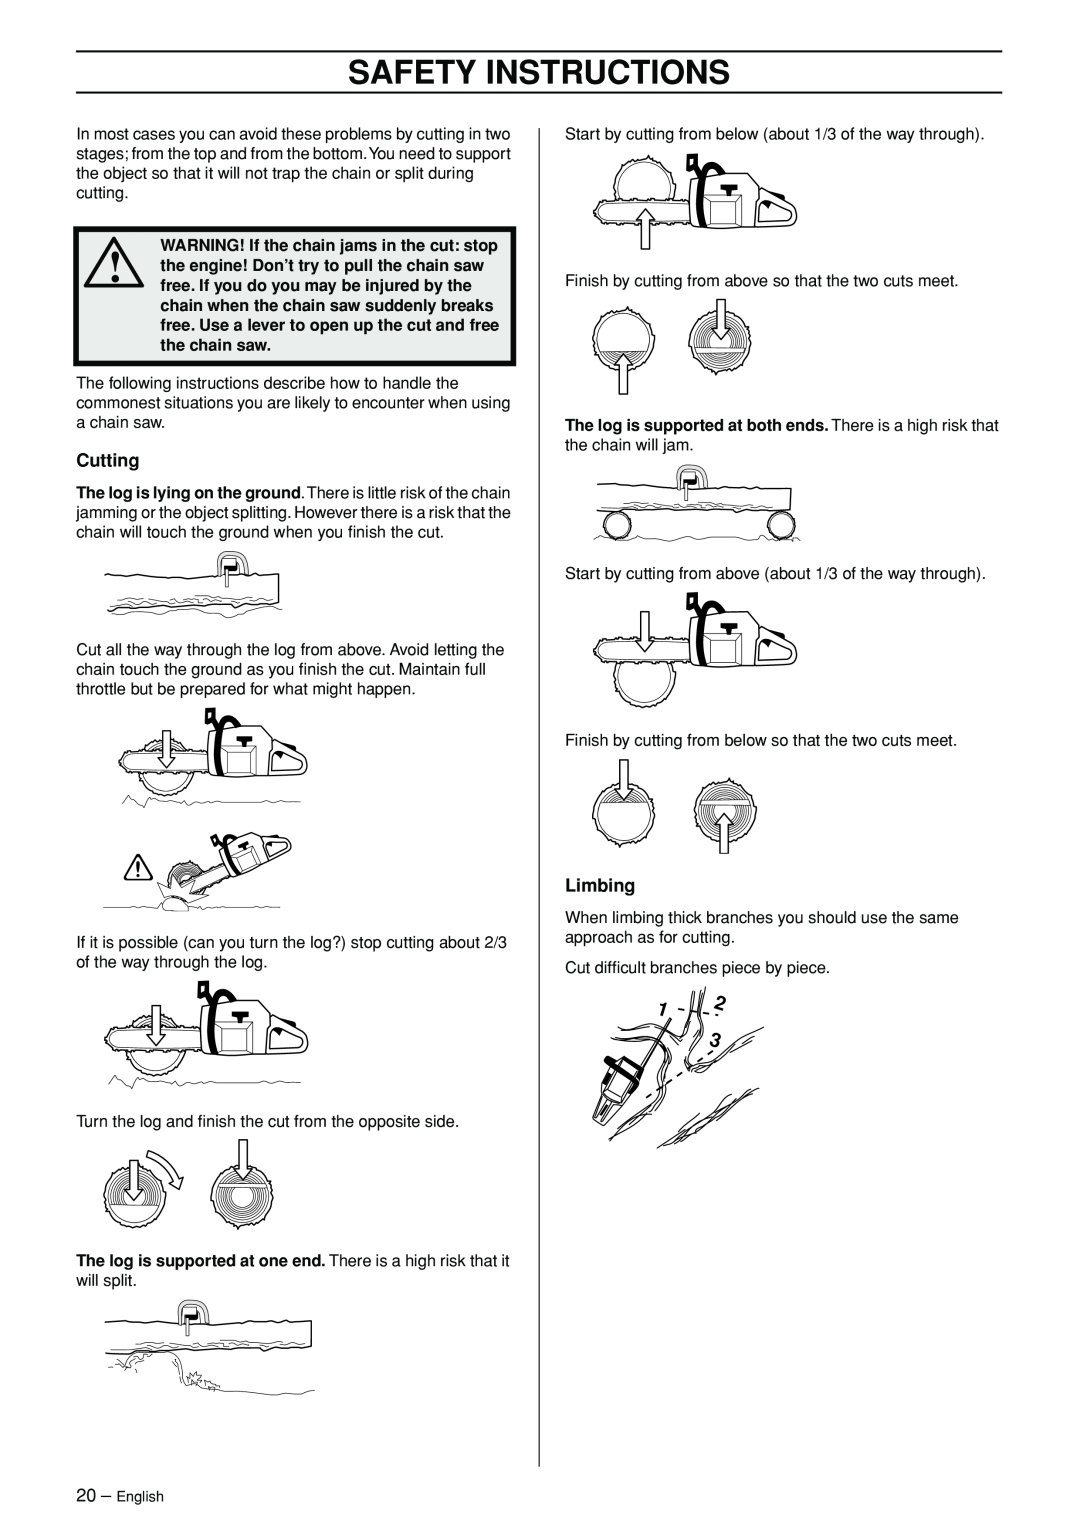 Jonsered CS 2156 manual Cutting, Limbing, WARNING! If the chain jams in the cut stop, Safety Instructions 